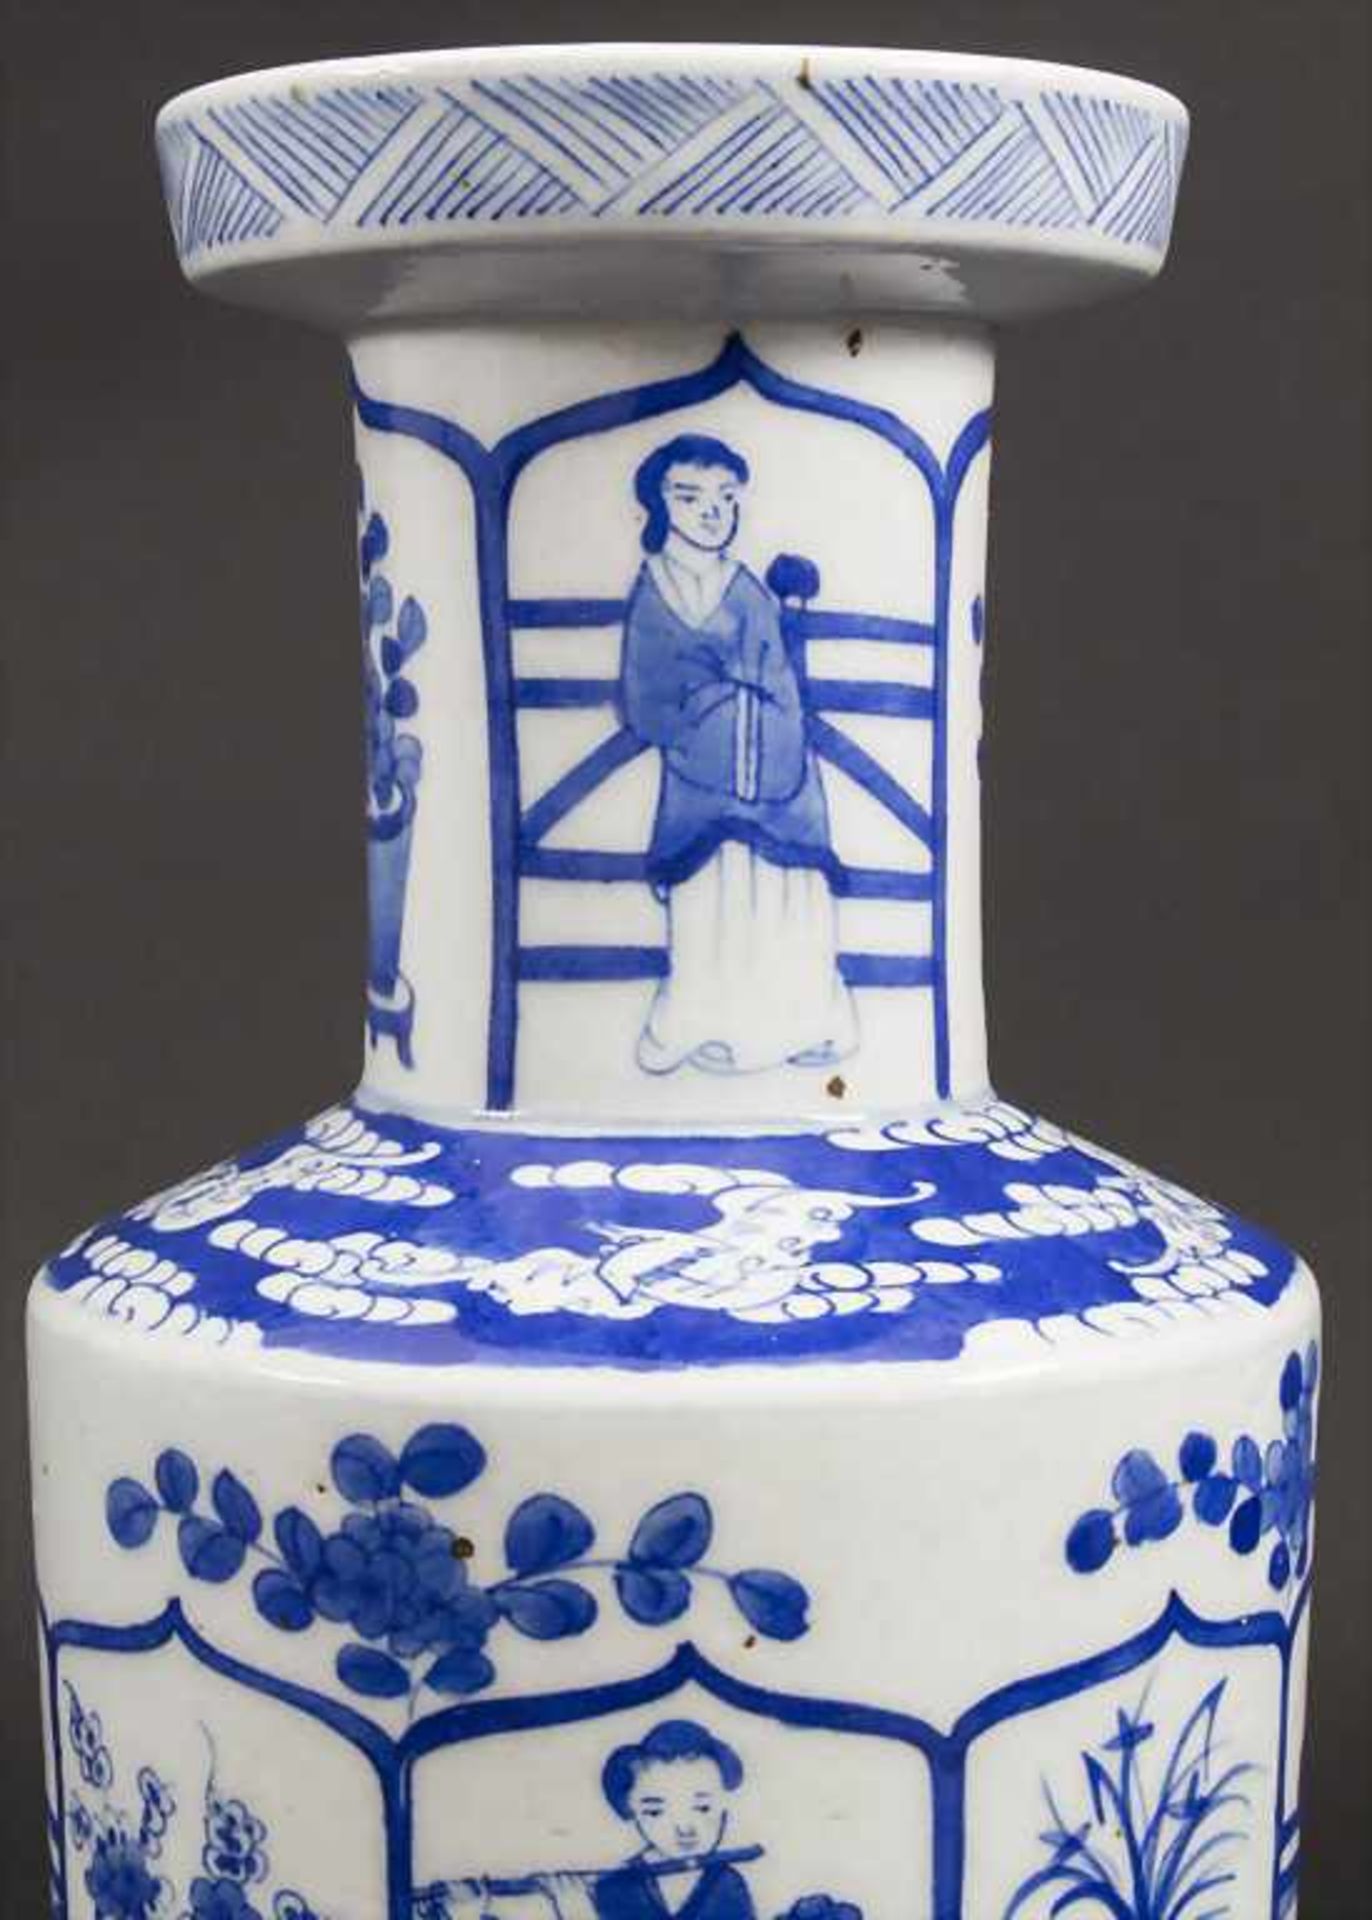 Ziervase / A decorative vase, China, Qing-Dynastie (1644-1911), wohl Kangxi-Periode (1662-1722) - Image 5 of 5